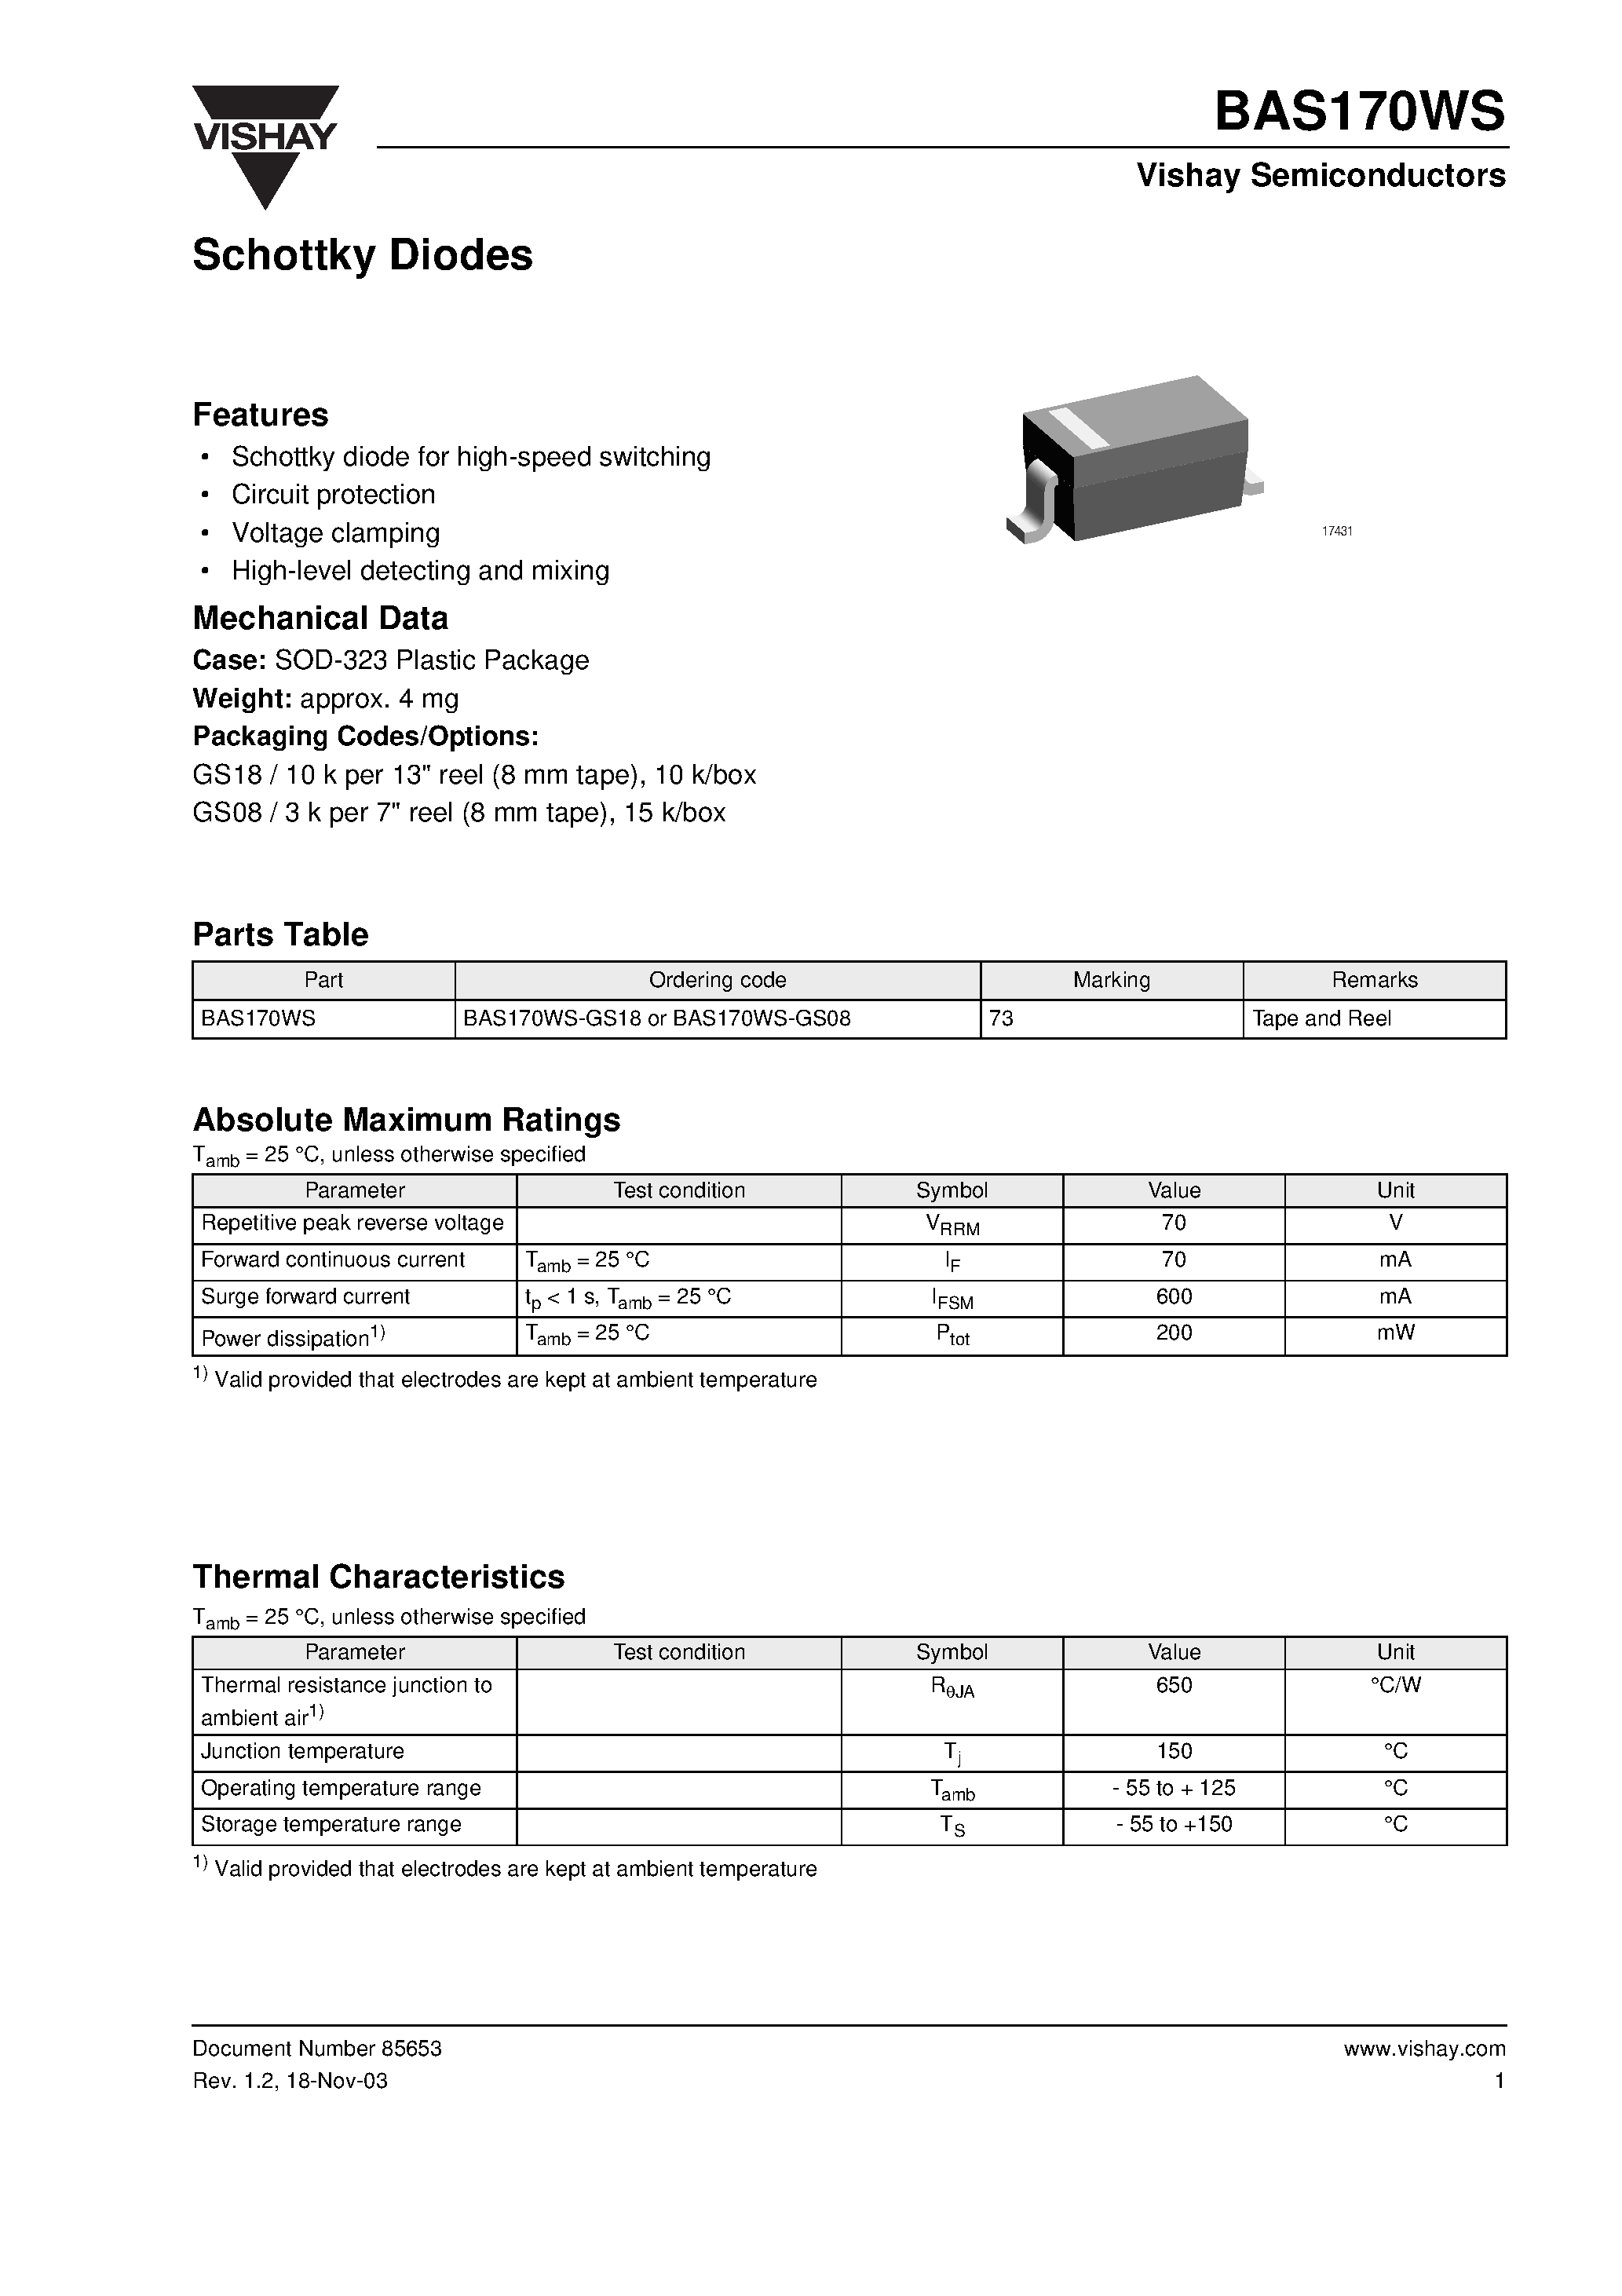 Datasheet BAS170WS-GS18 - Schottky Diodes page 1